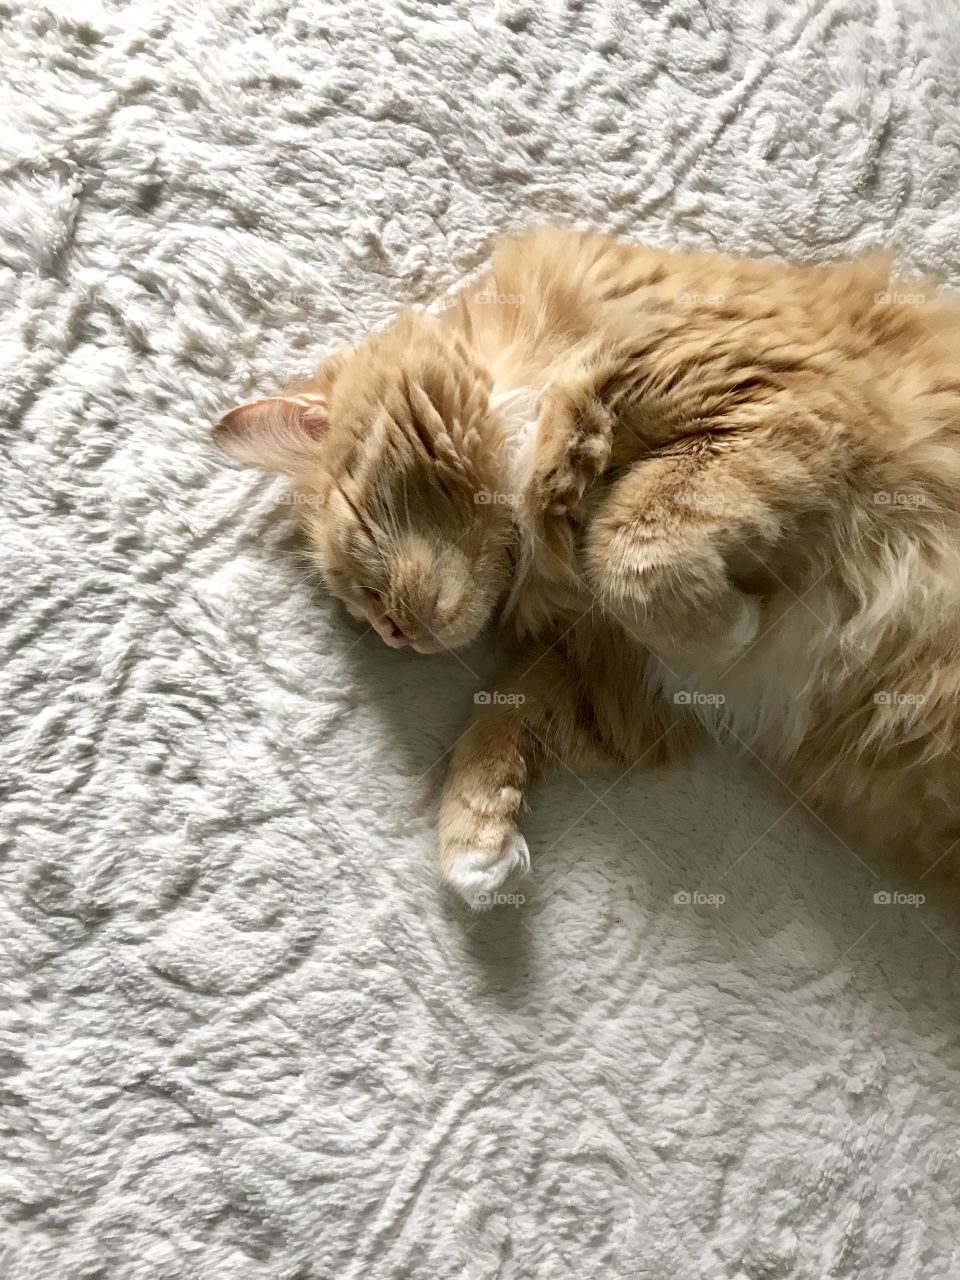 mainecoon striped orange long haired cat laying on fluffy bed asleep